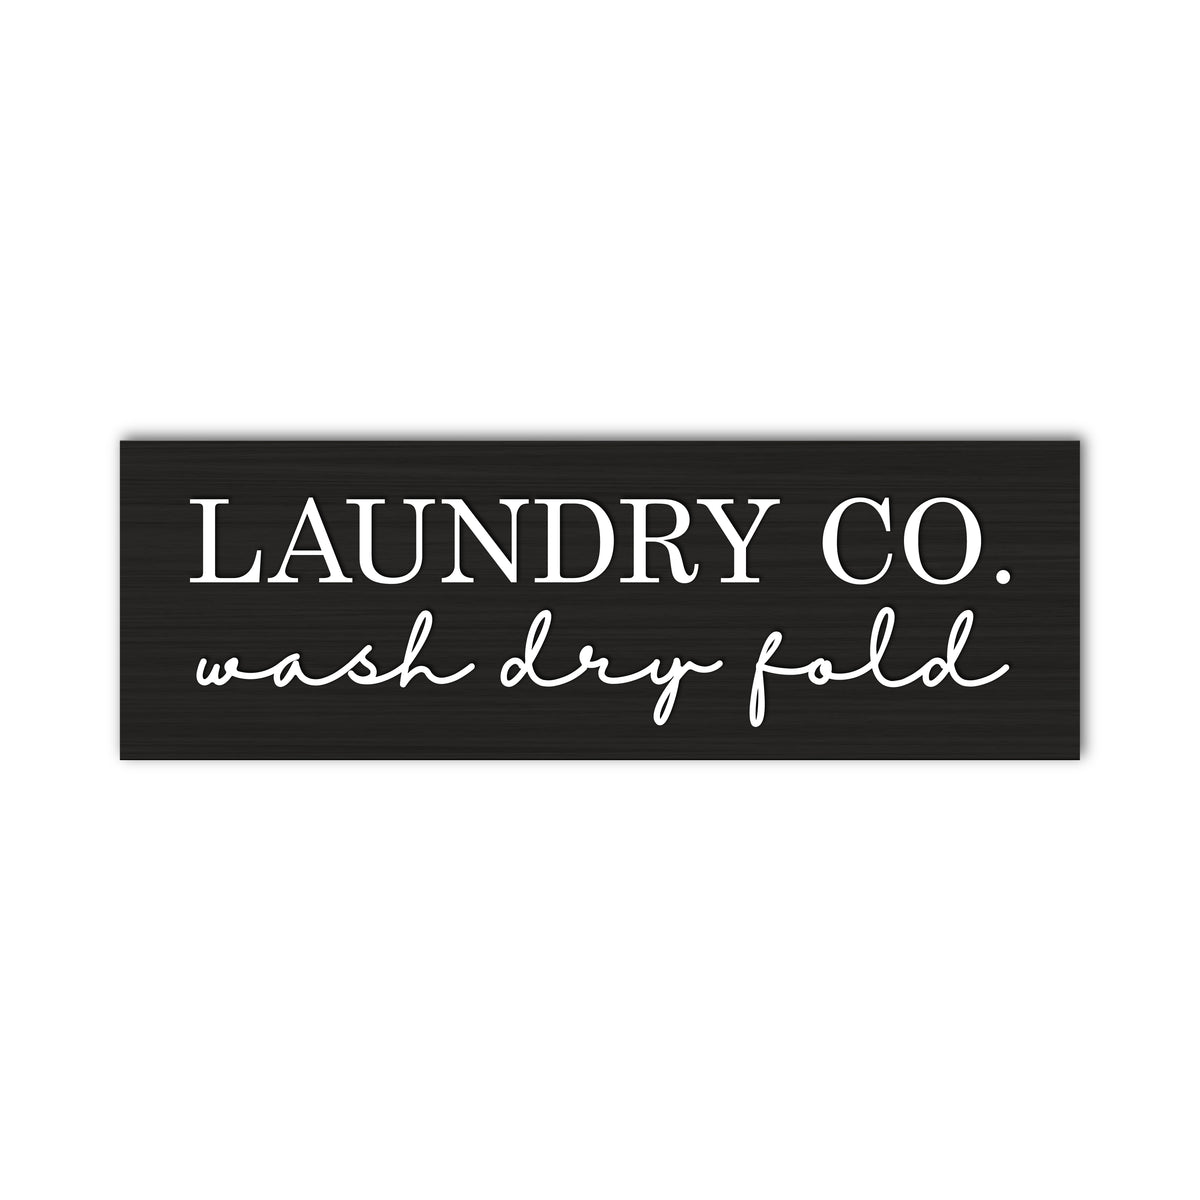 Laundry Co. Wash Dry Fold – ONEONE2